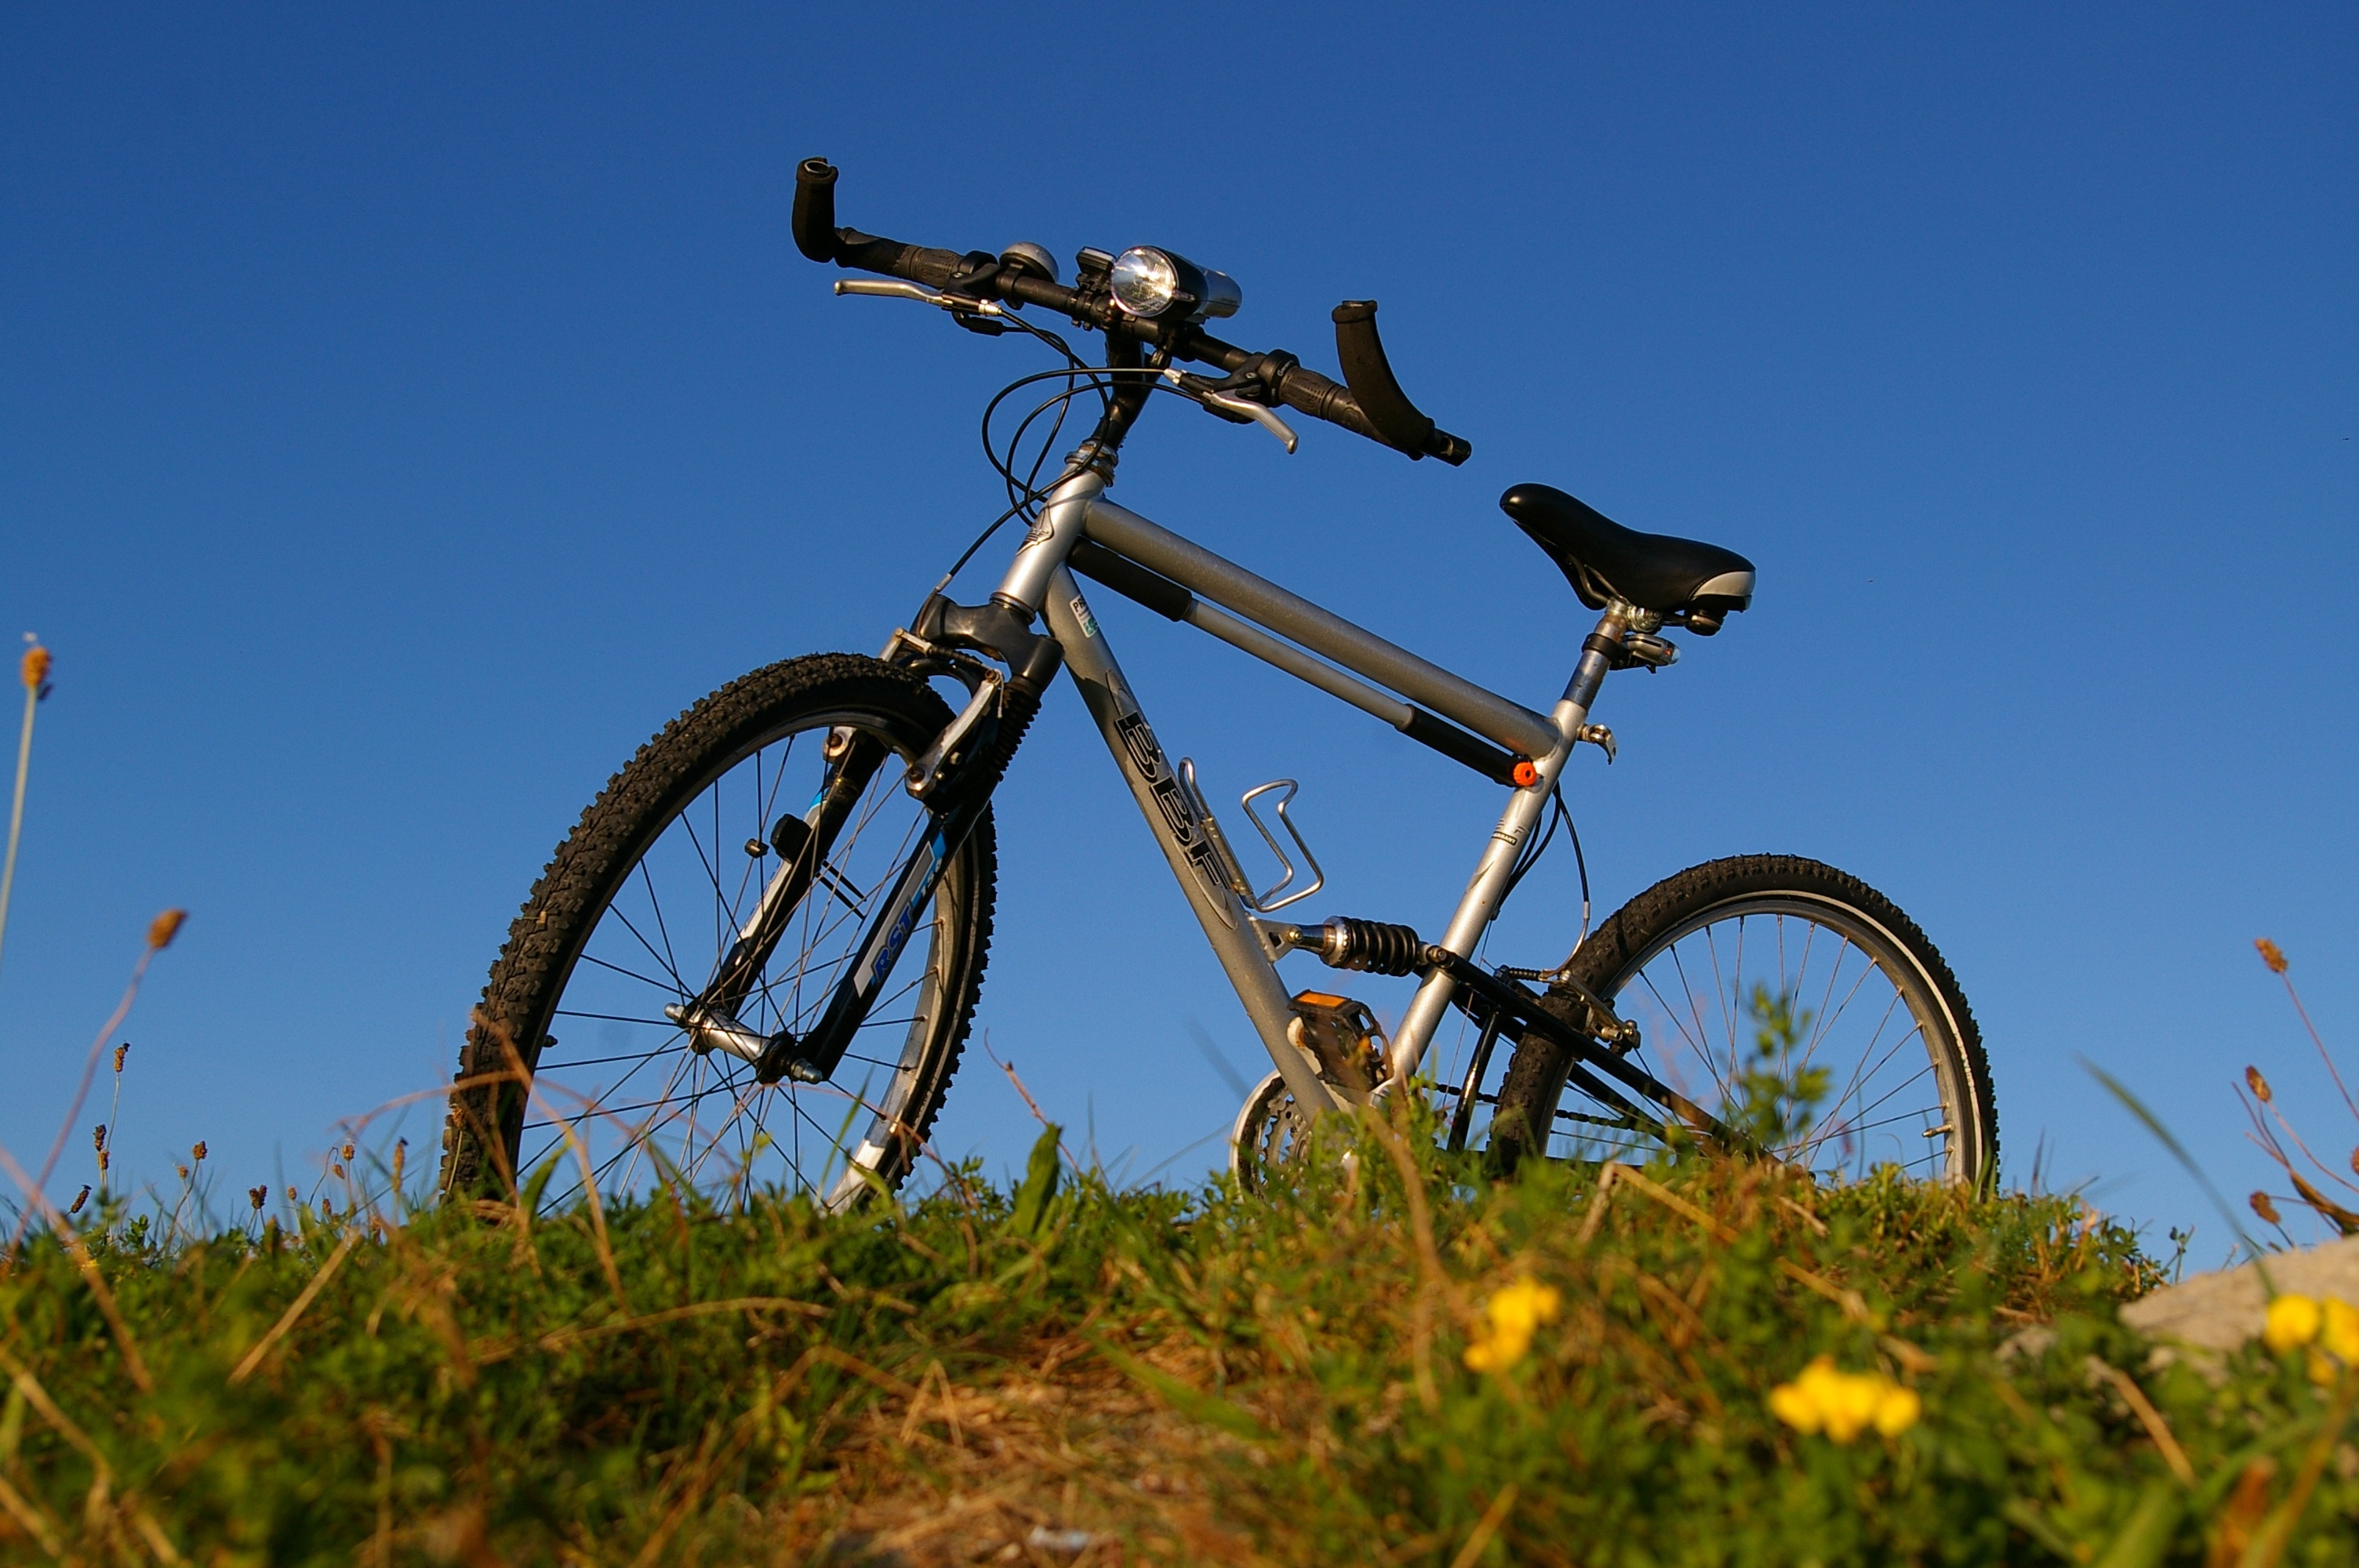 gray full suspension mountain bike parked under blue sky during daytime